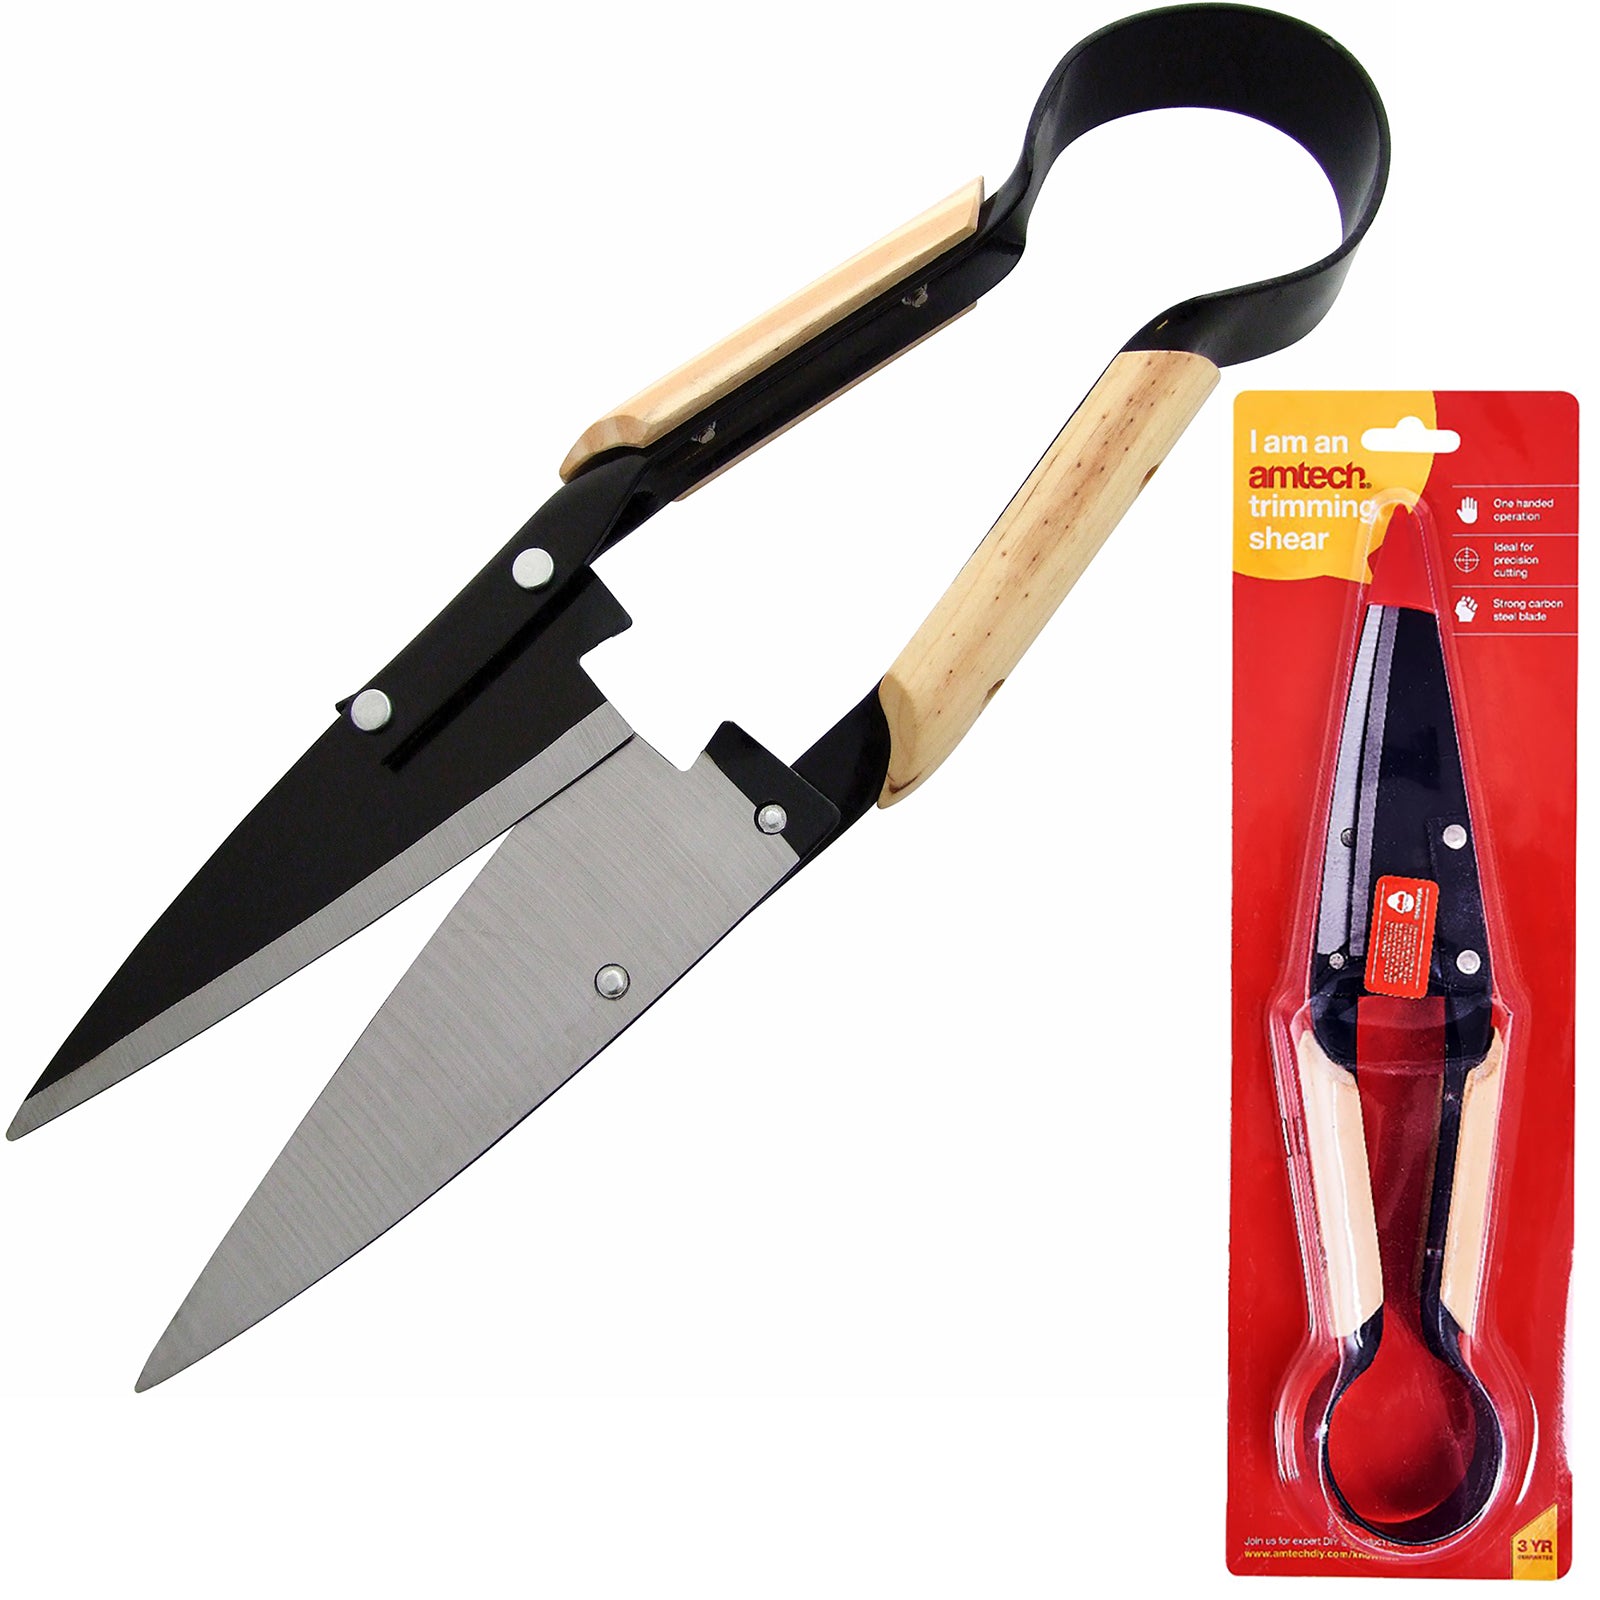 Amtech One Handed Trimming Shears Wooden Handle